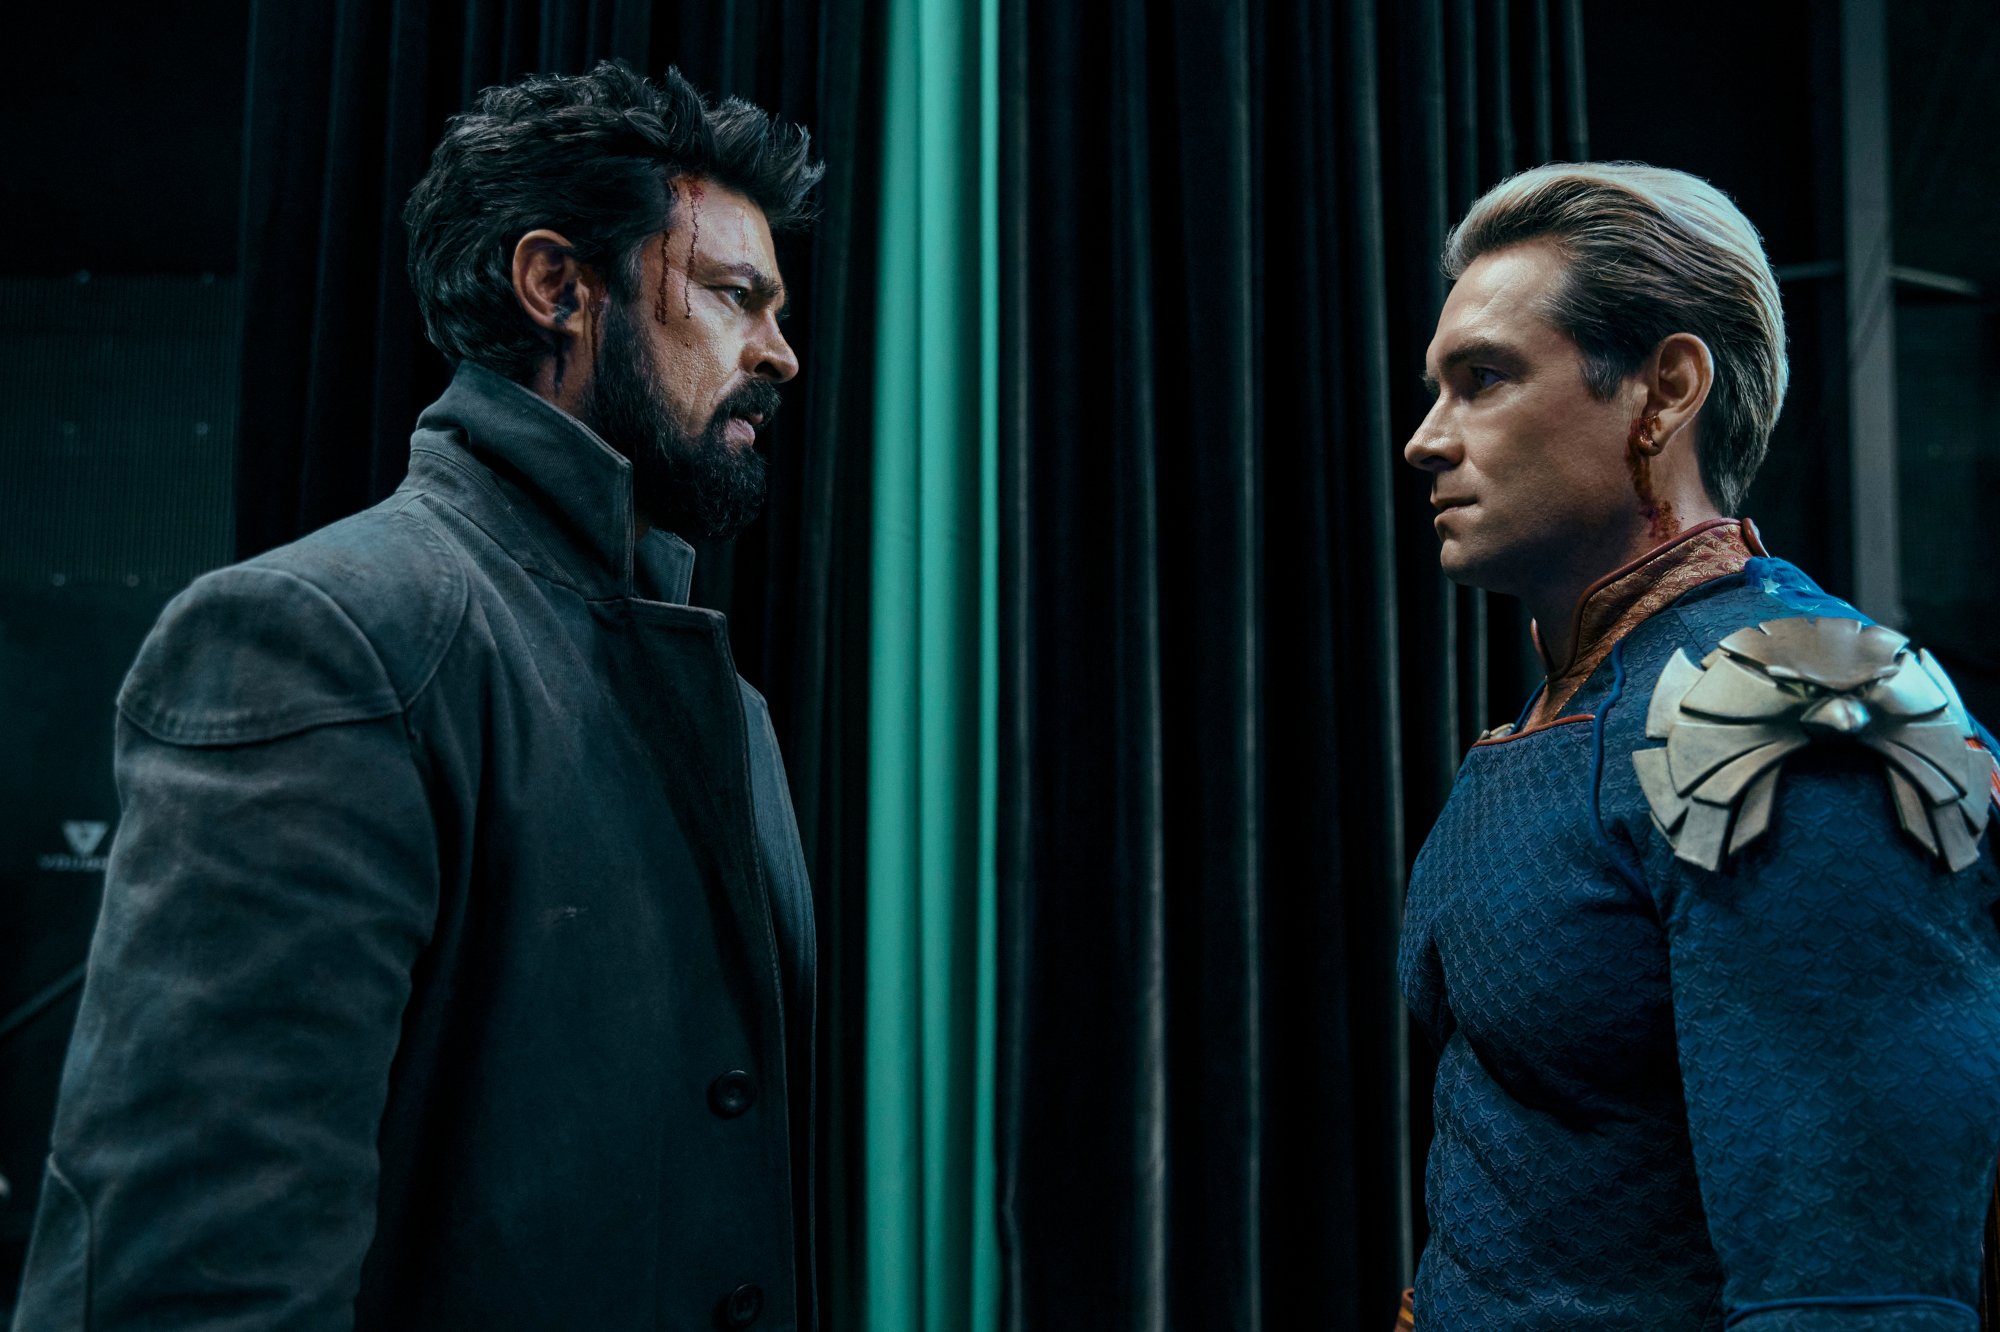 Karl Urban and Antony Starr as Billy Butcher and Homelander in 'The Boys' Season 3 finale, which has an ending that sets up season 4. The two are facing one another and wearing grim expressions.